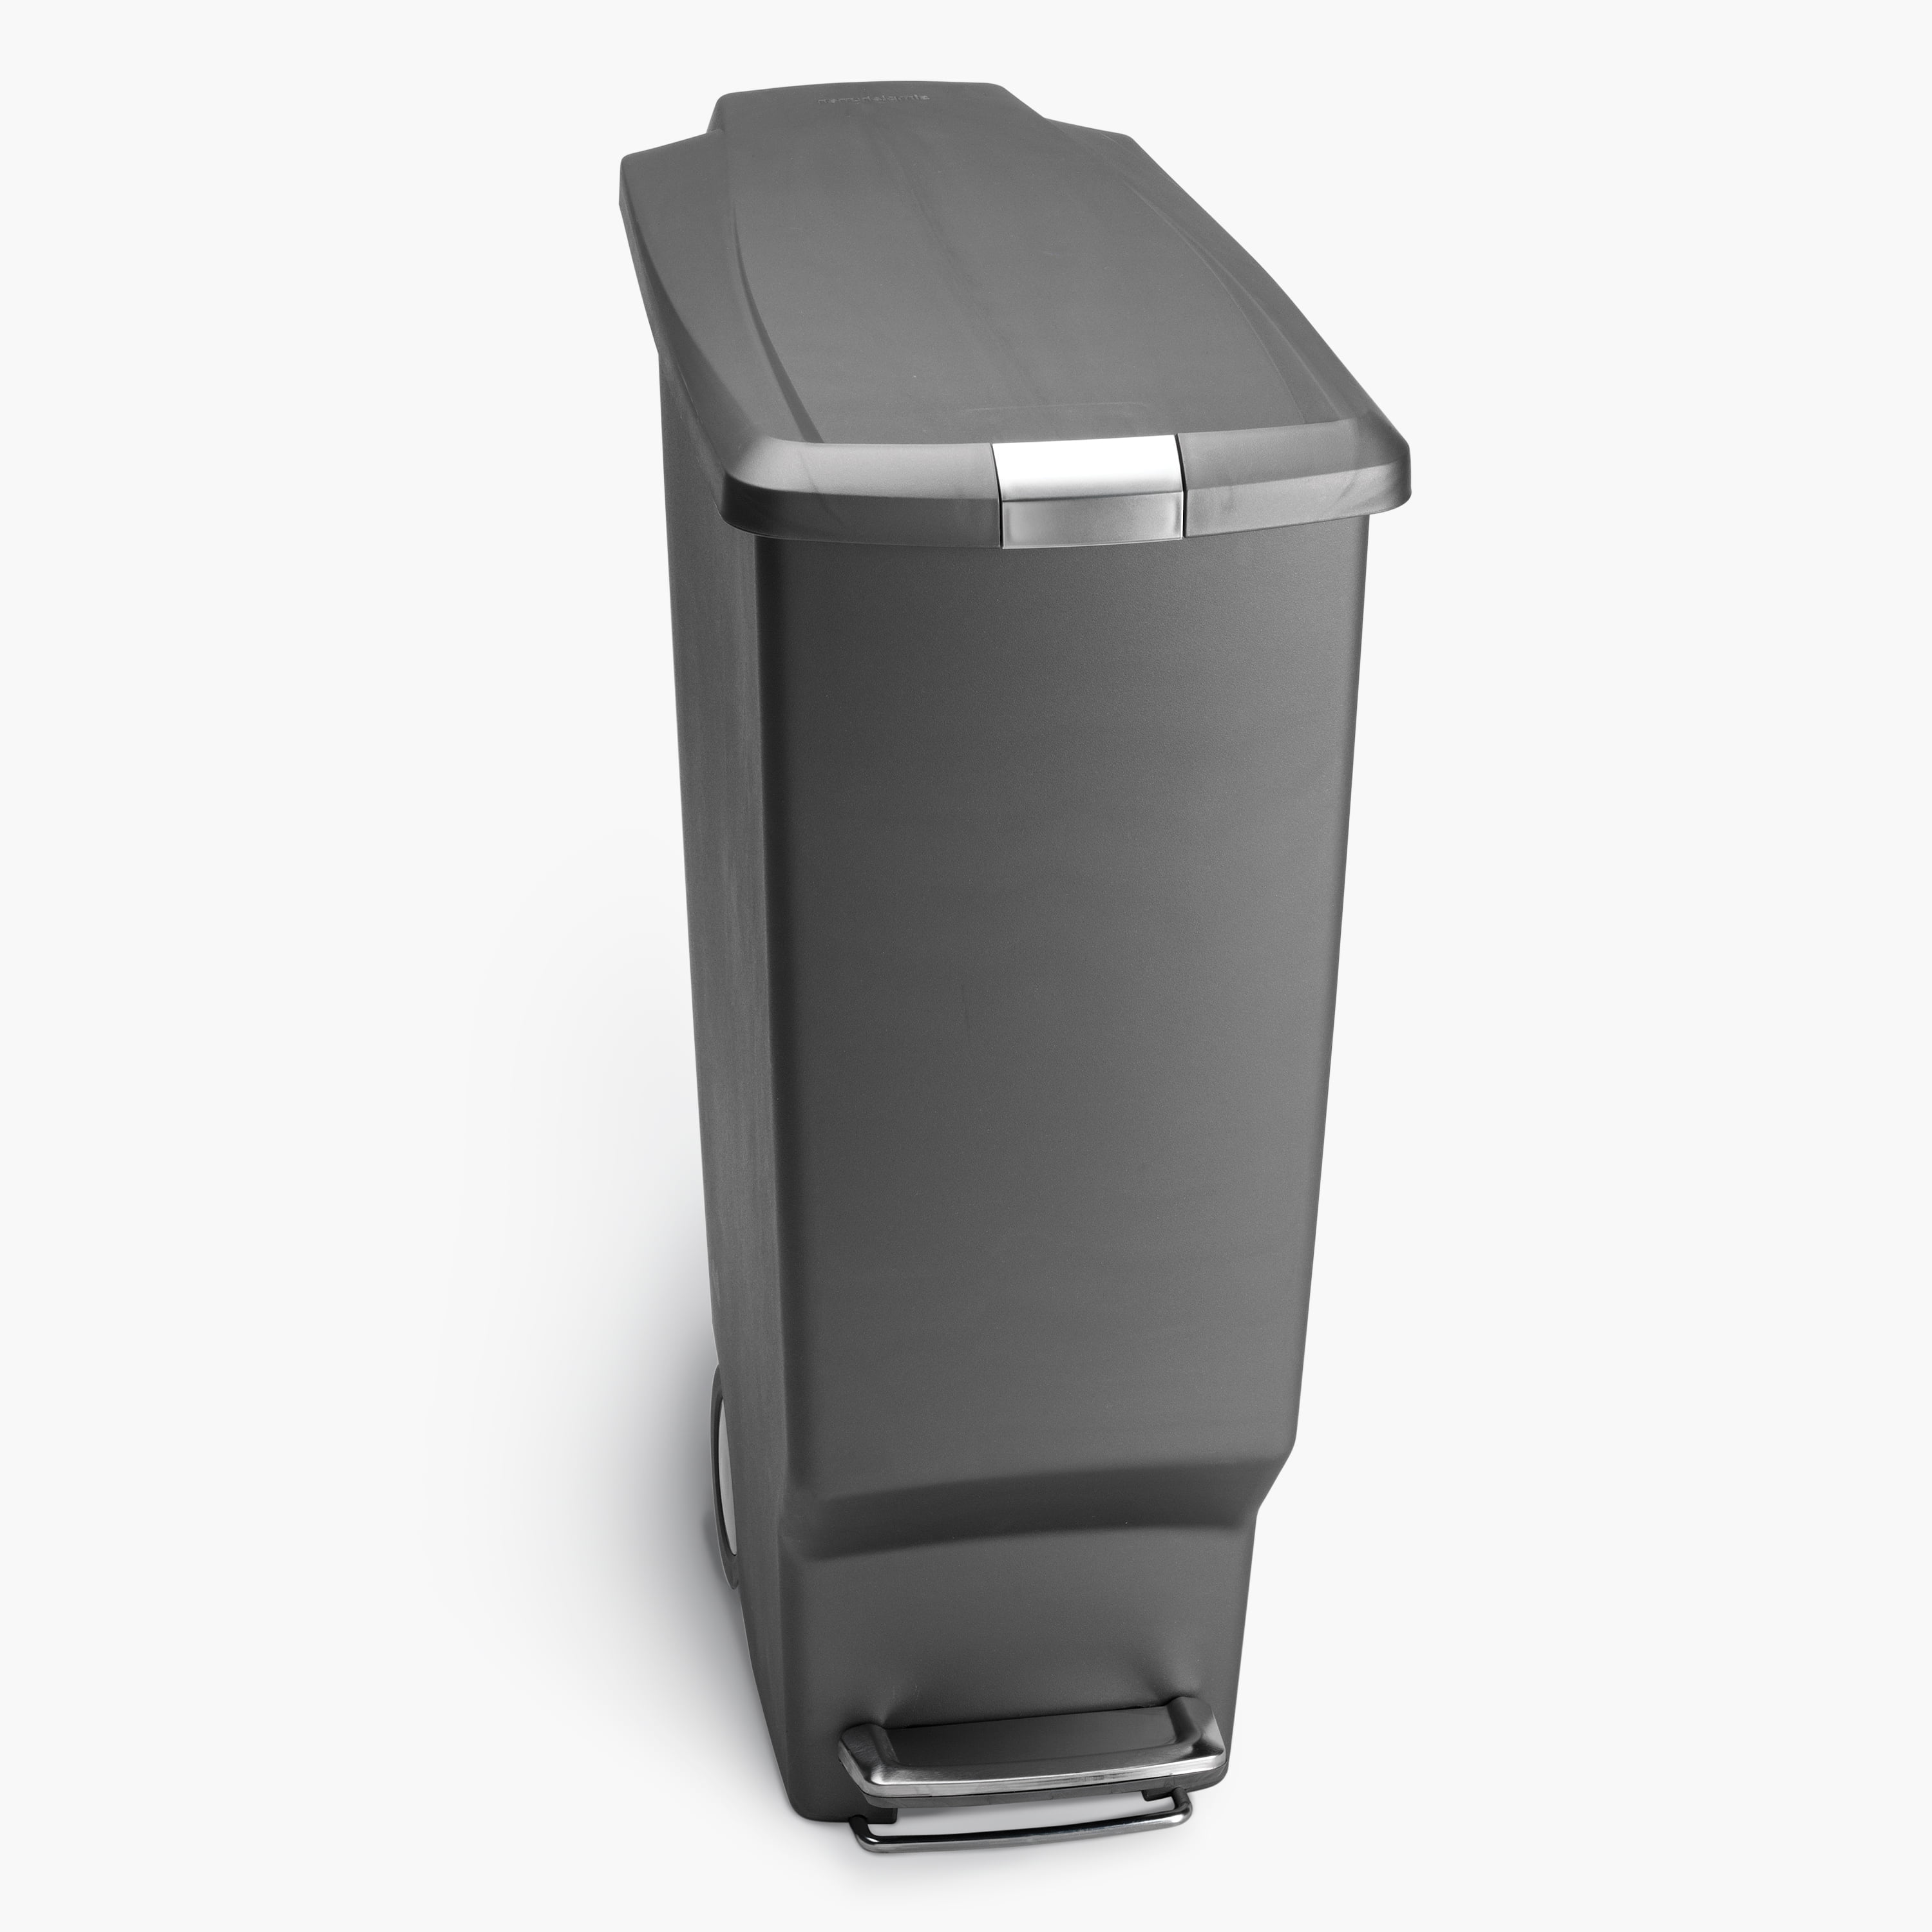 simplehuman 40L Slim Touch Bar Trash Can Brushed Stainless Steel